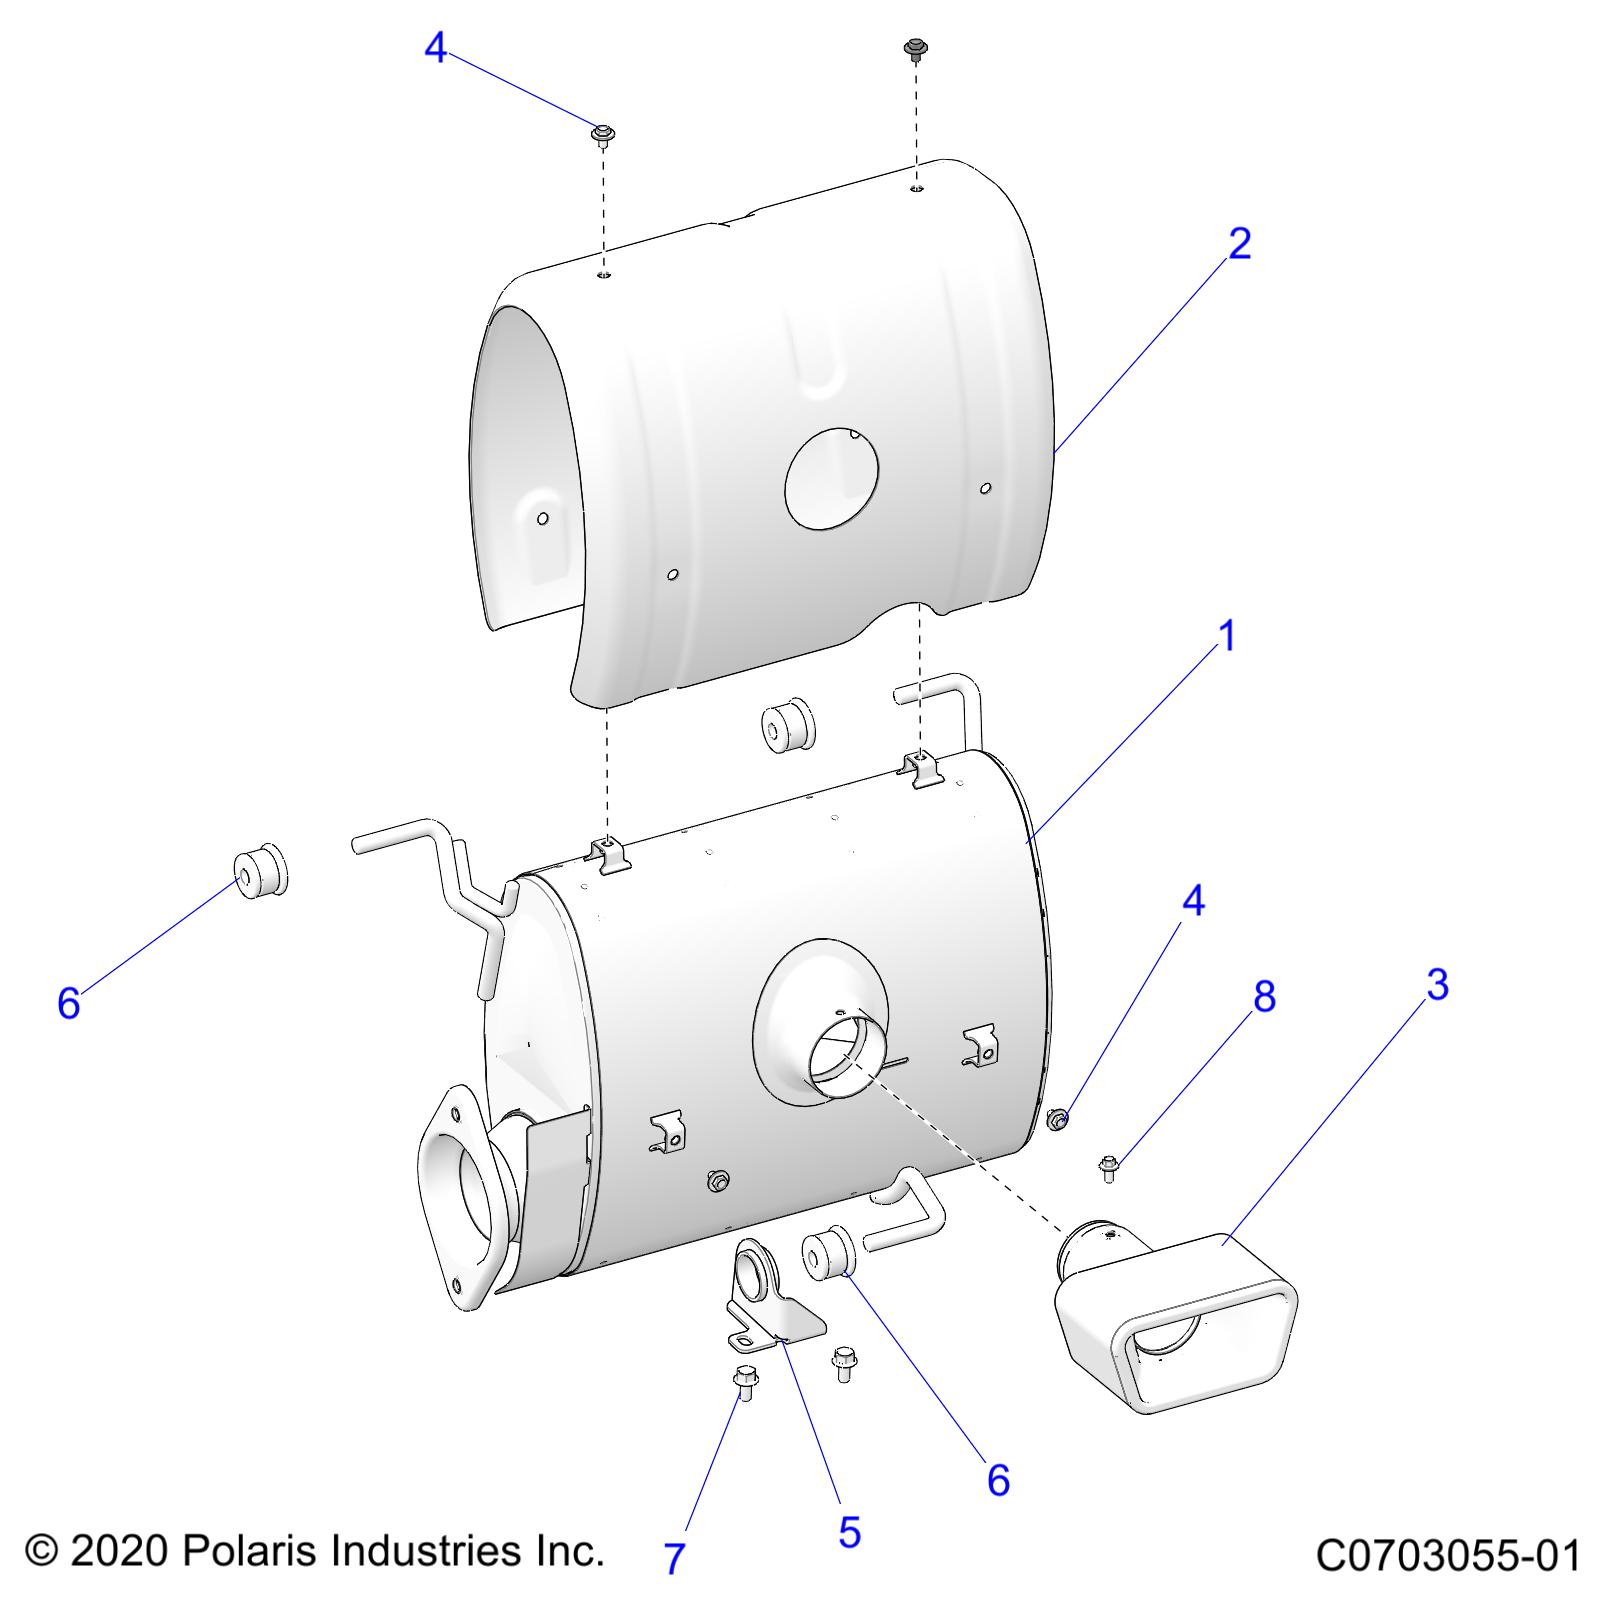 Part Number : 1263462 ASM-EXHAUST MOUNT LOWER